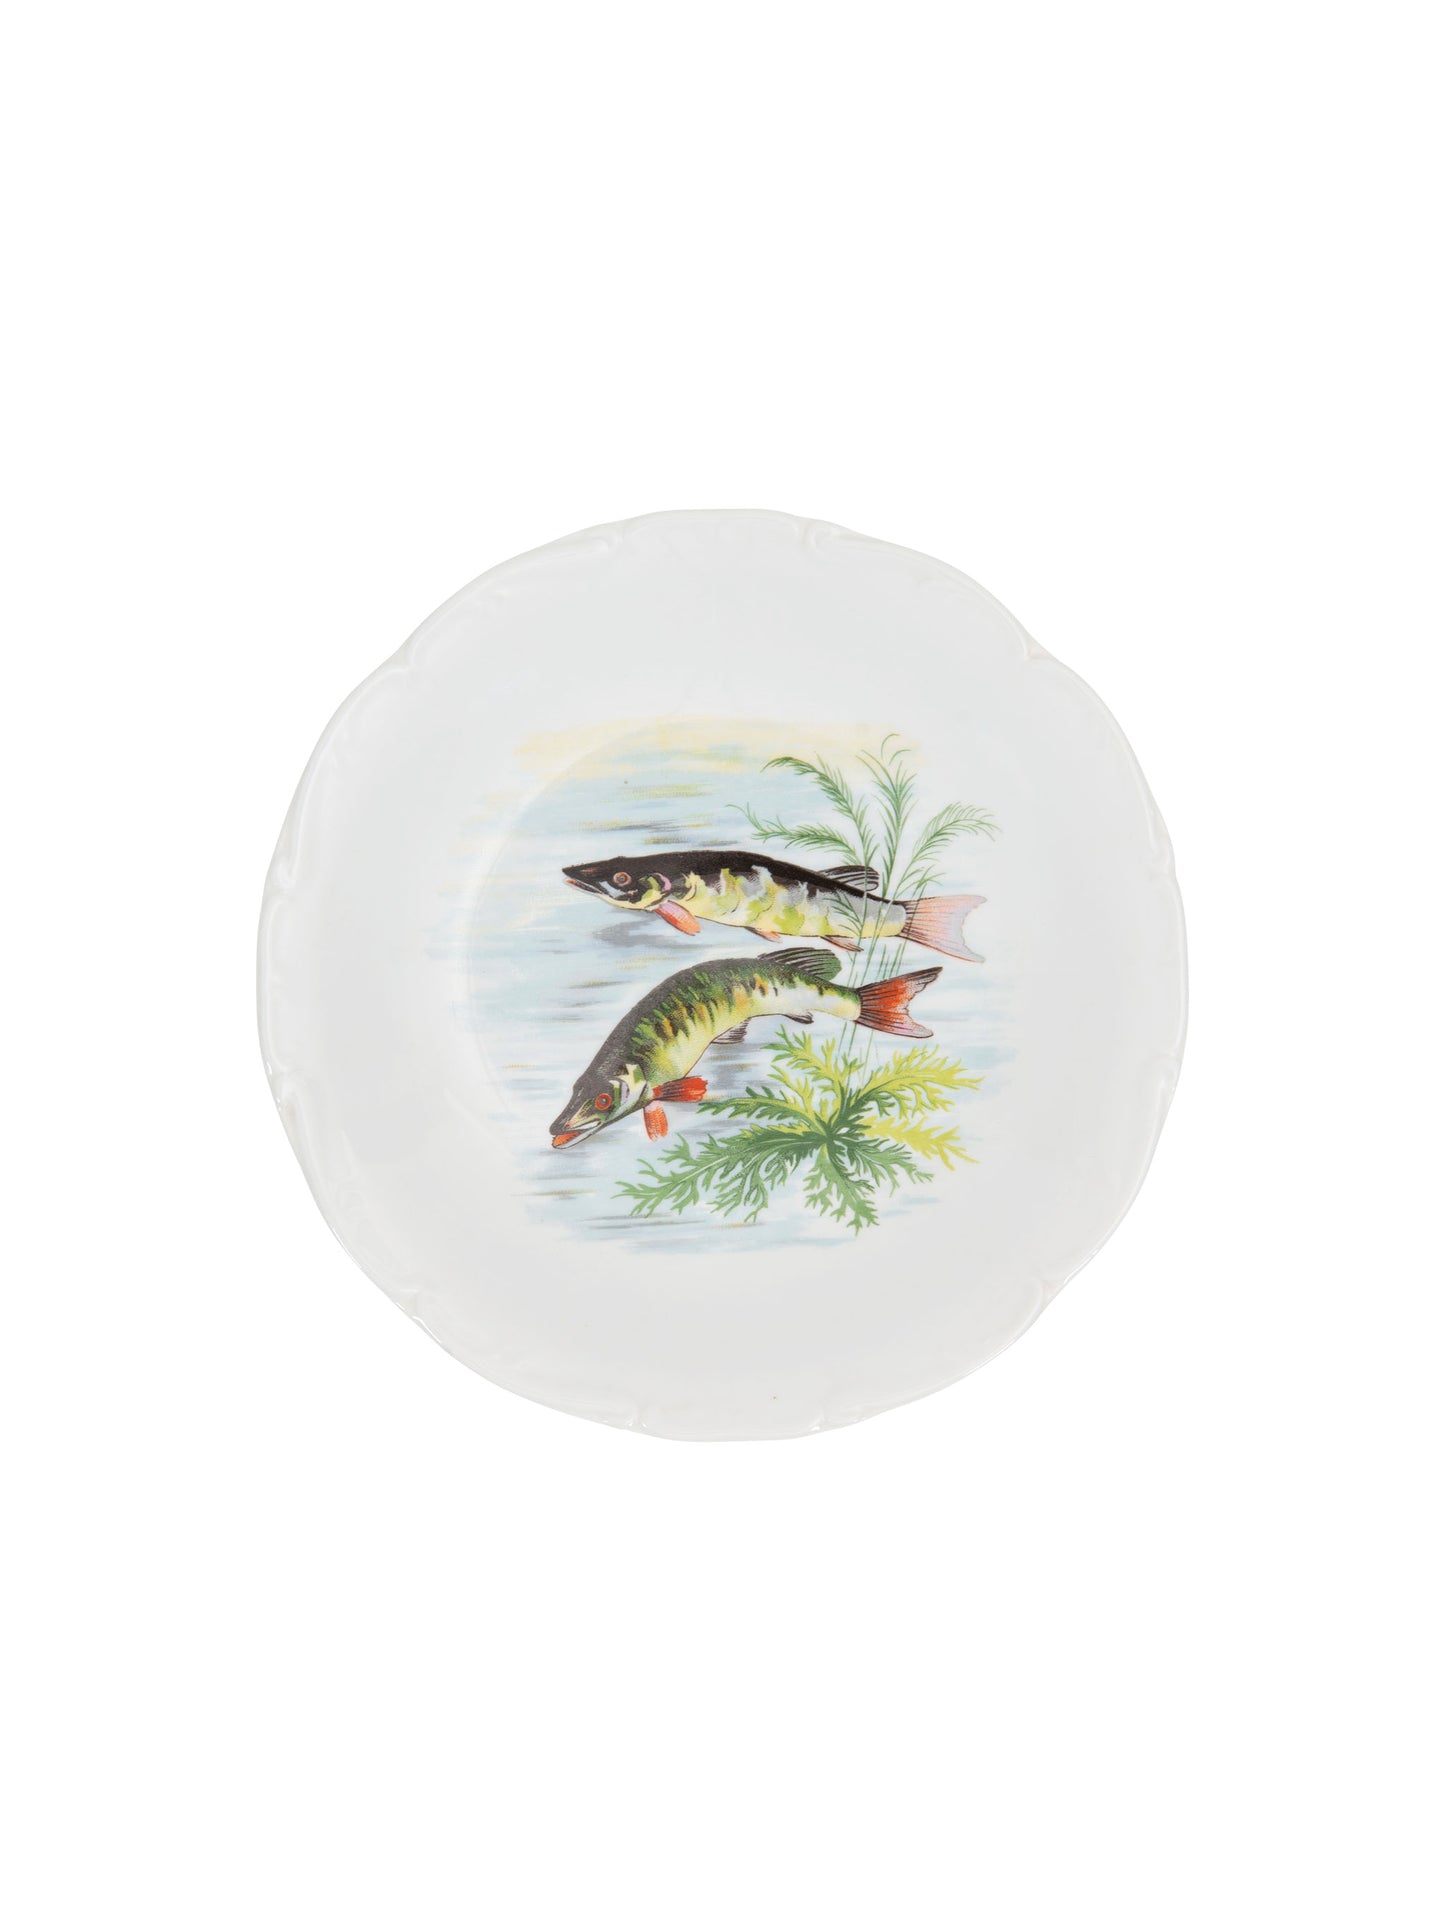 Vintage Sologne Fish Dinnerware Collection Plate 3 Weston Table